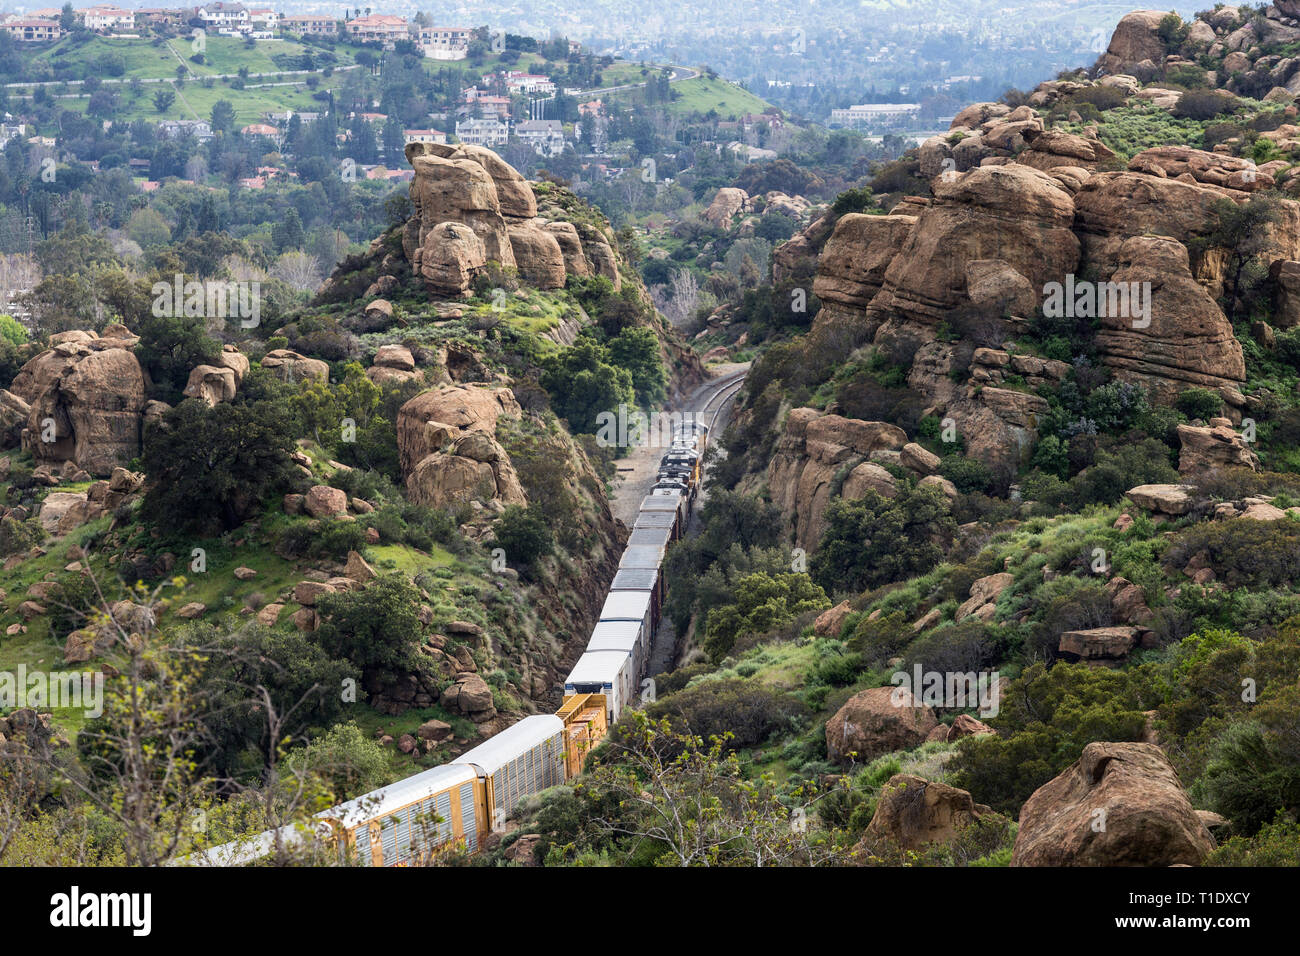 Los Angeles, California, USA - March 20, 2019:  Freight train passing rock formations and expensive San Fernando Valley homes in the Santa Susana Pass Stock Photo